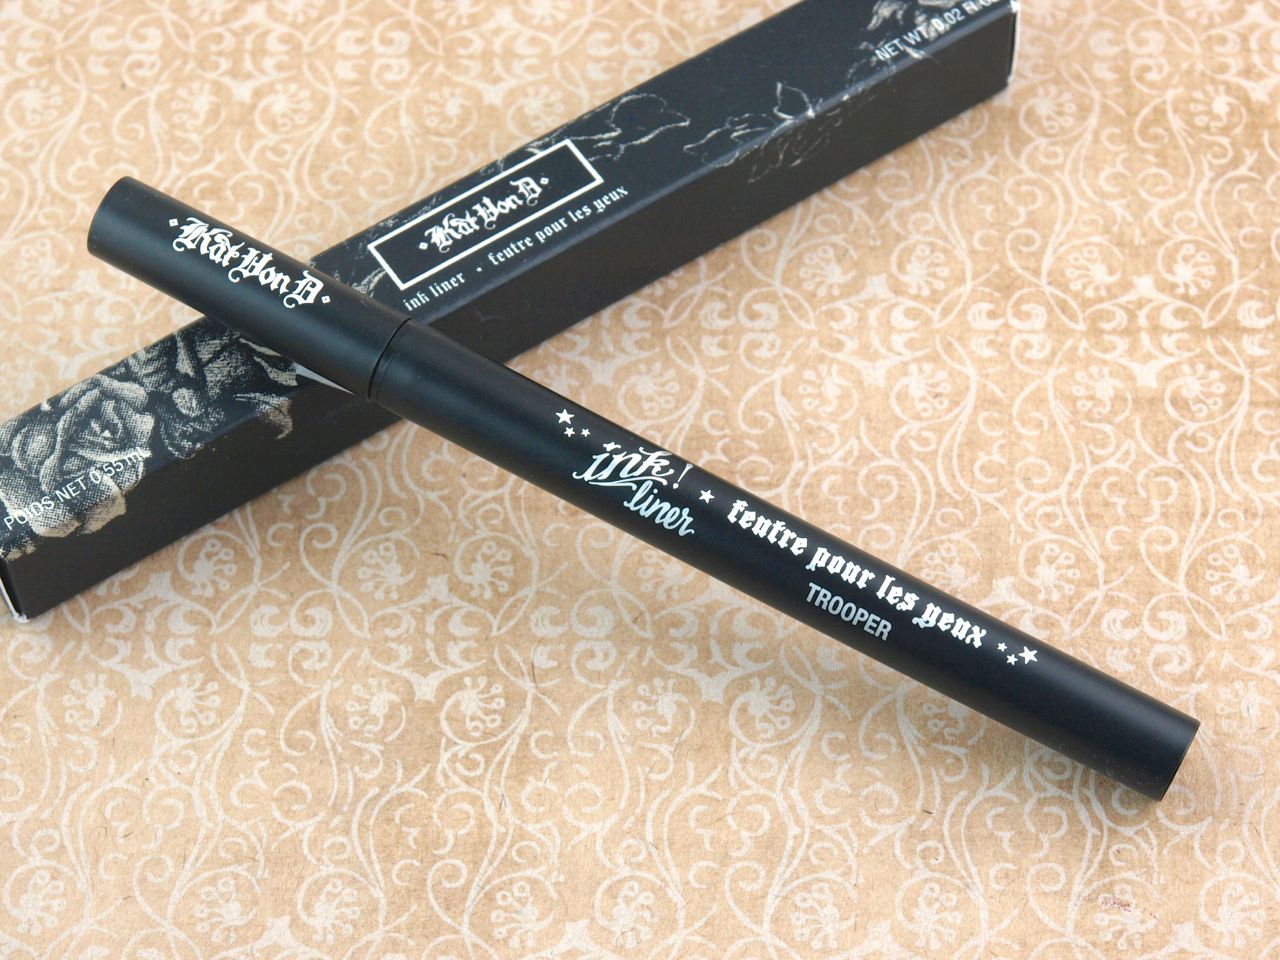 to uger solo Objector Kat Von D Ink Liner in "Trooper": Review and Swatches | The Happy Sloths:  Beauty, Makeup, and Skincare Blog with Reviews and Swatches